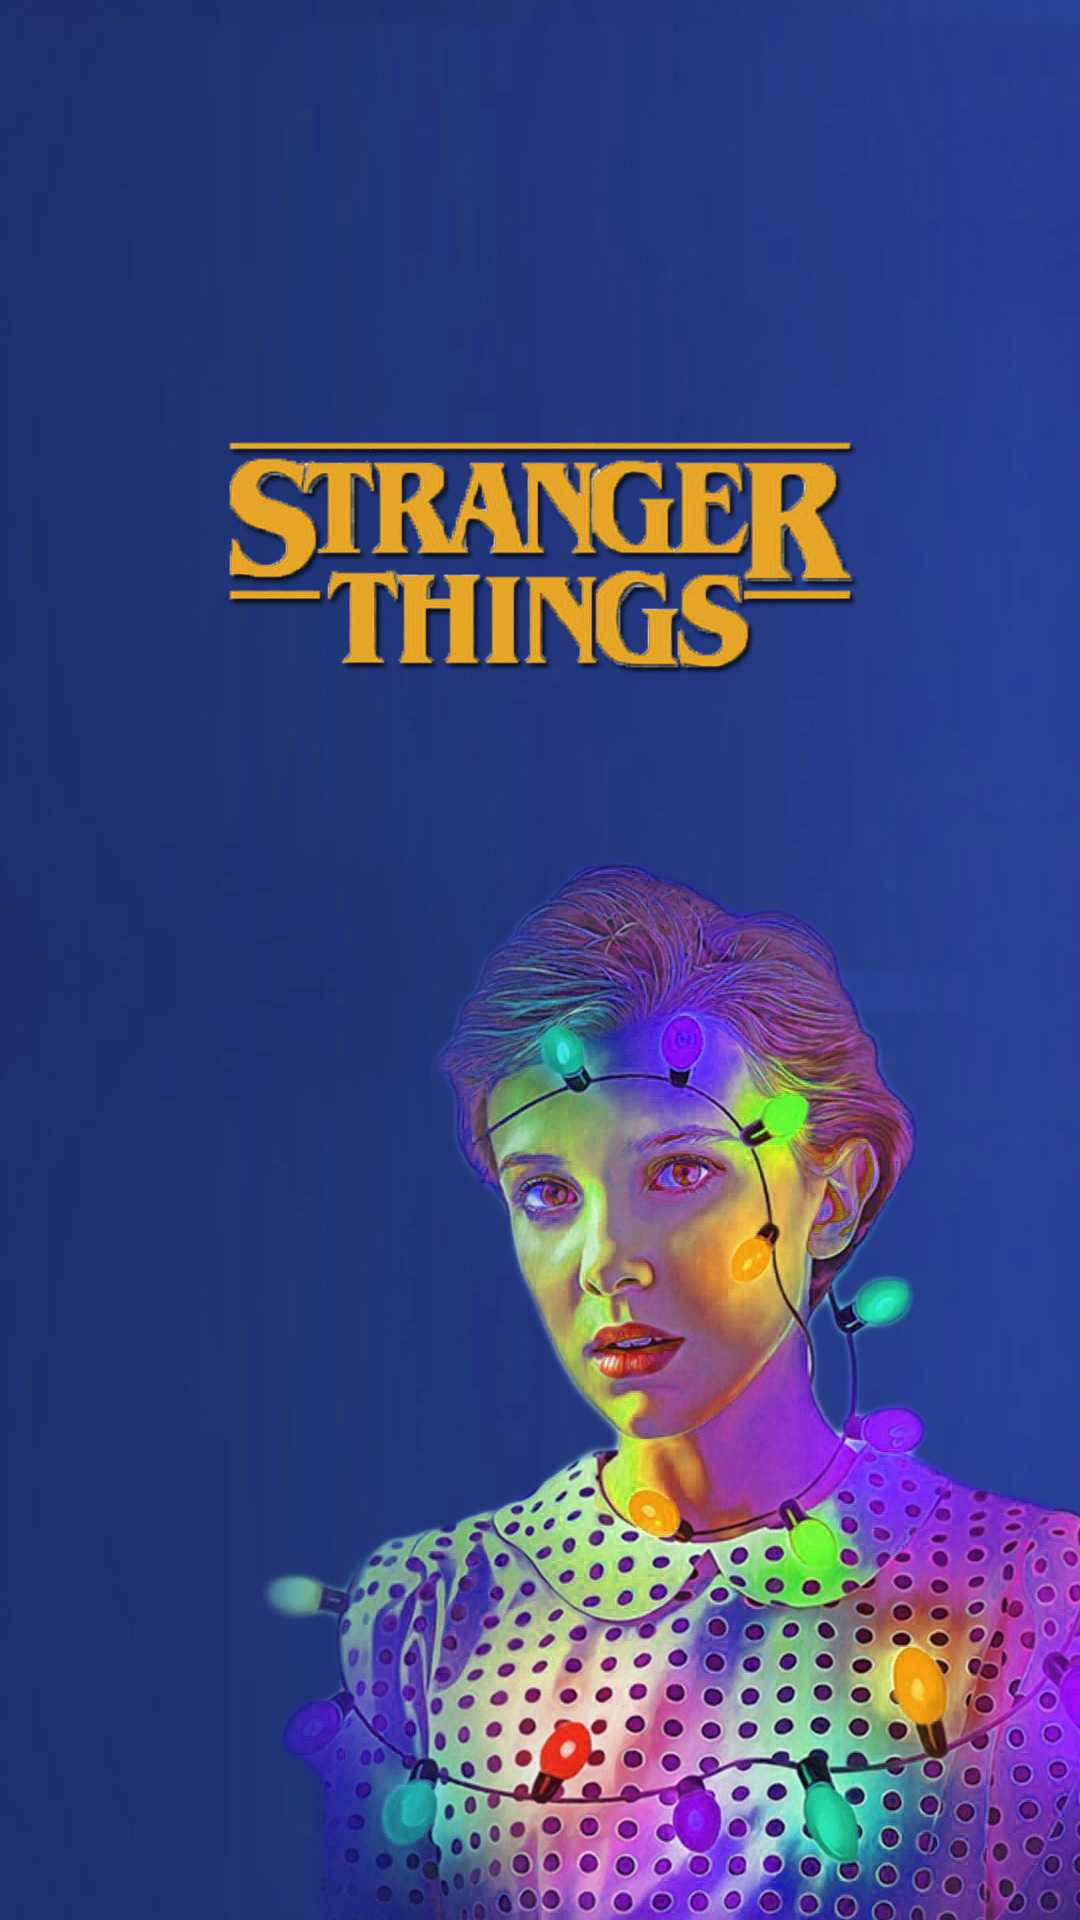 11 Stranger Things wallpapers for iPhone in 2023 - iGeeksBlog